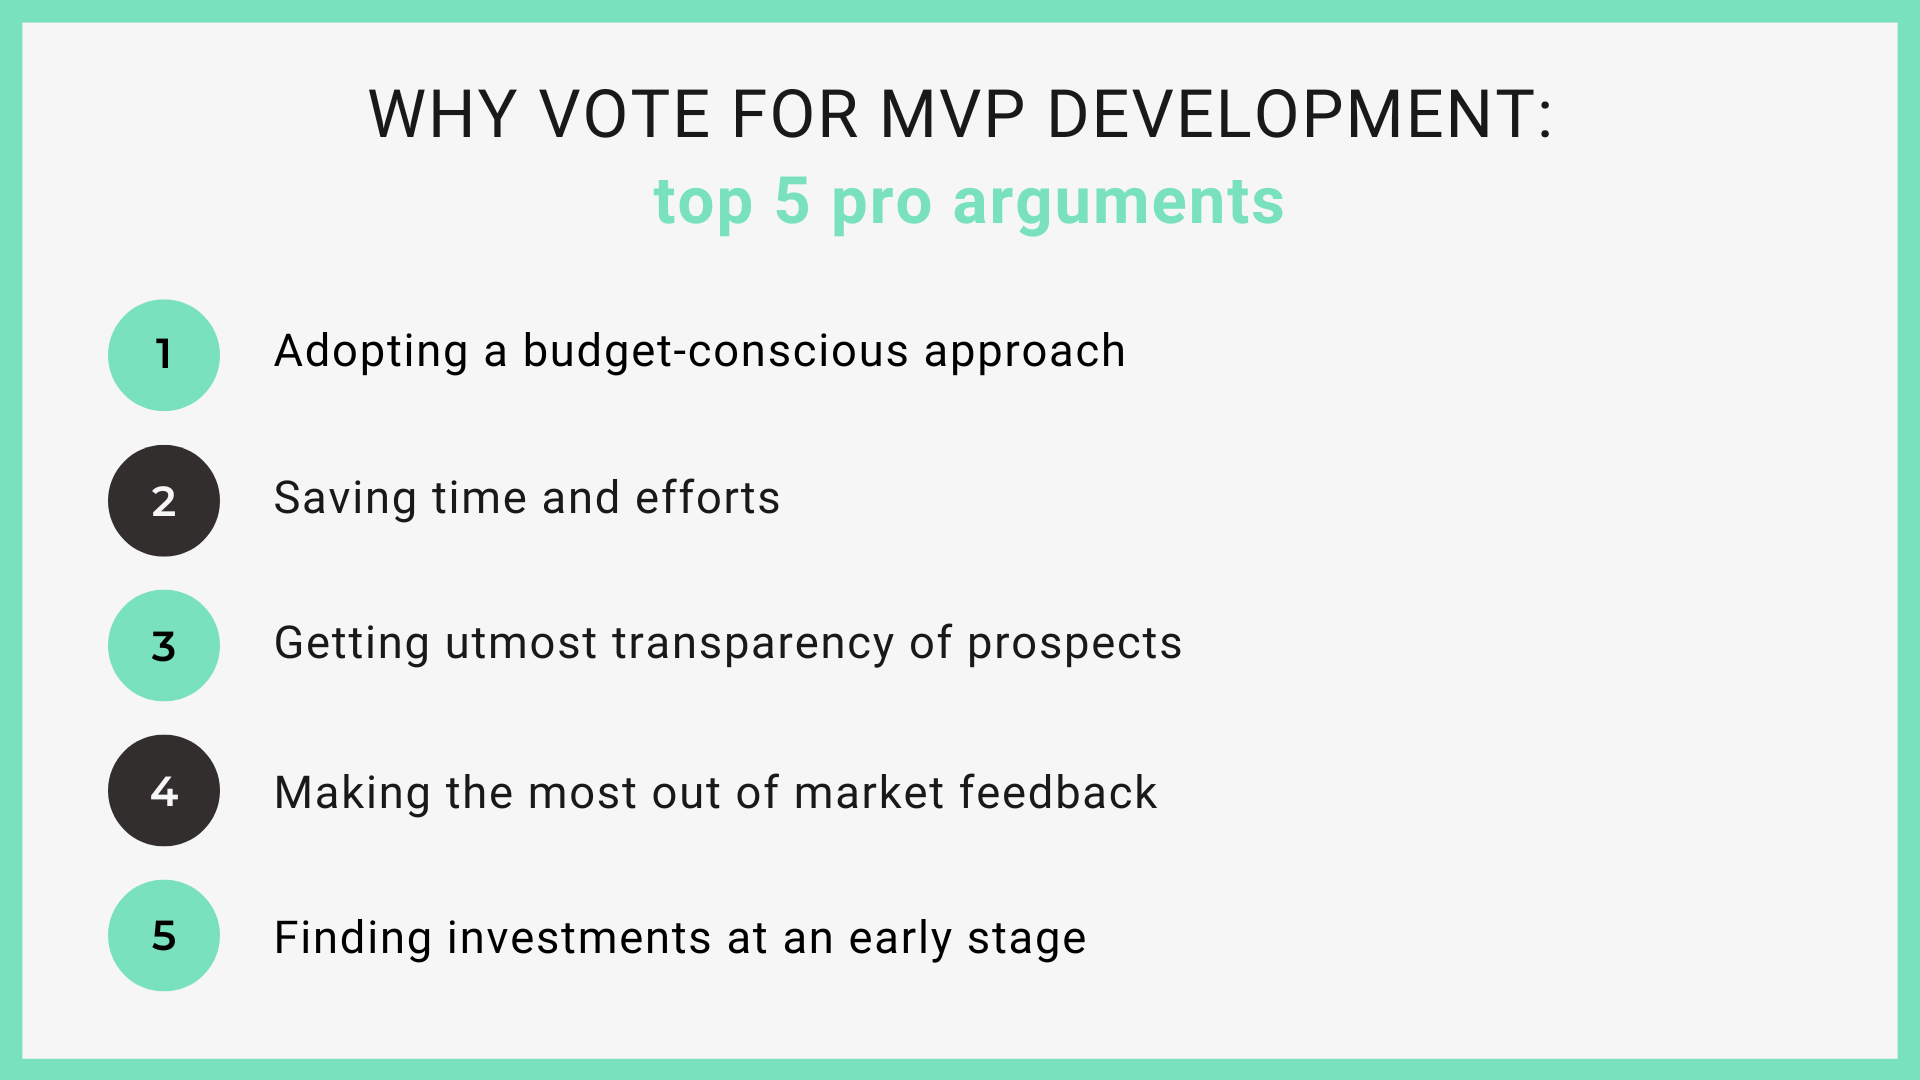 Why vote for MVP development top 5 pro arguments